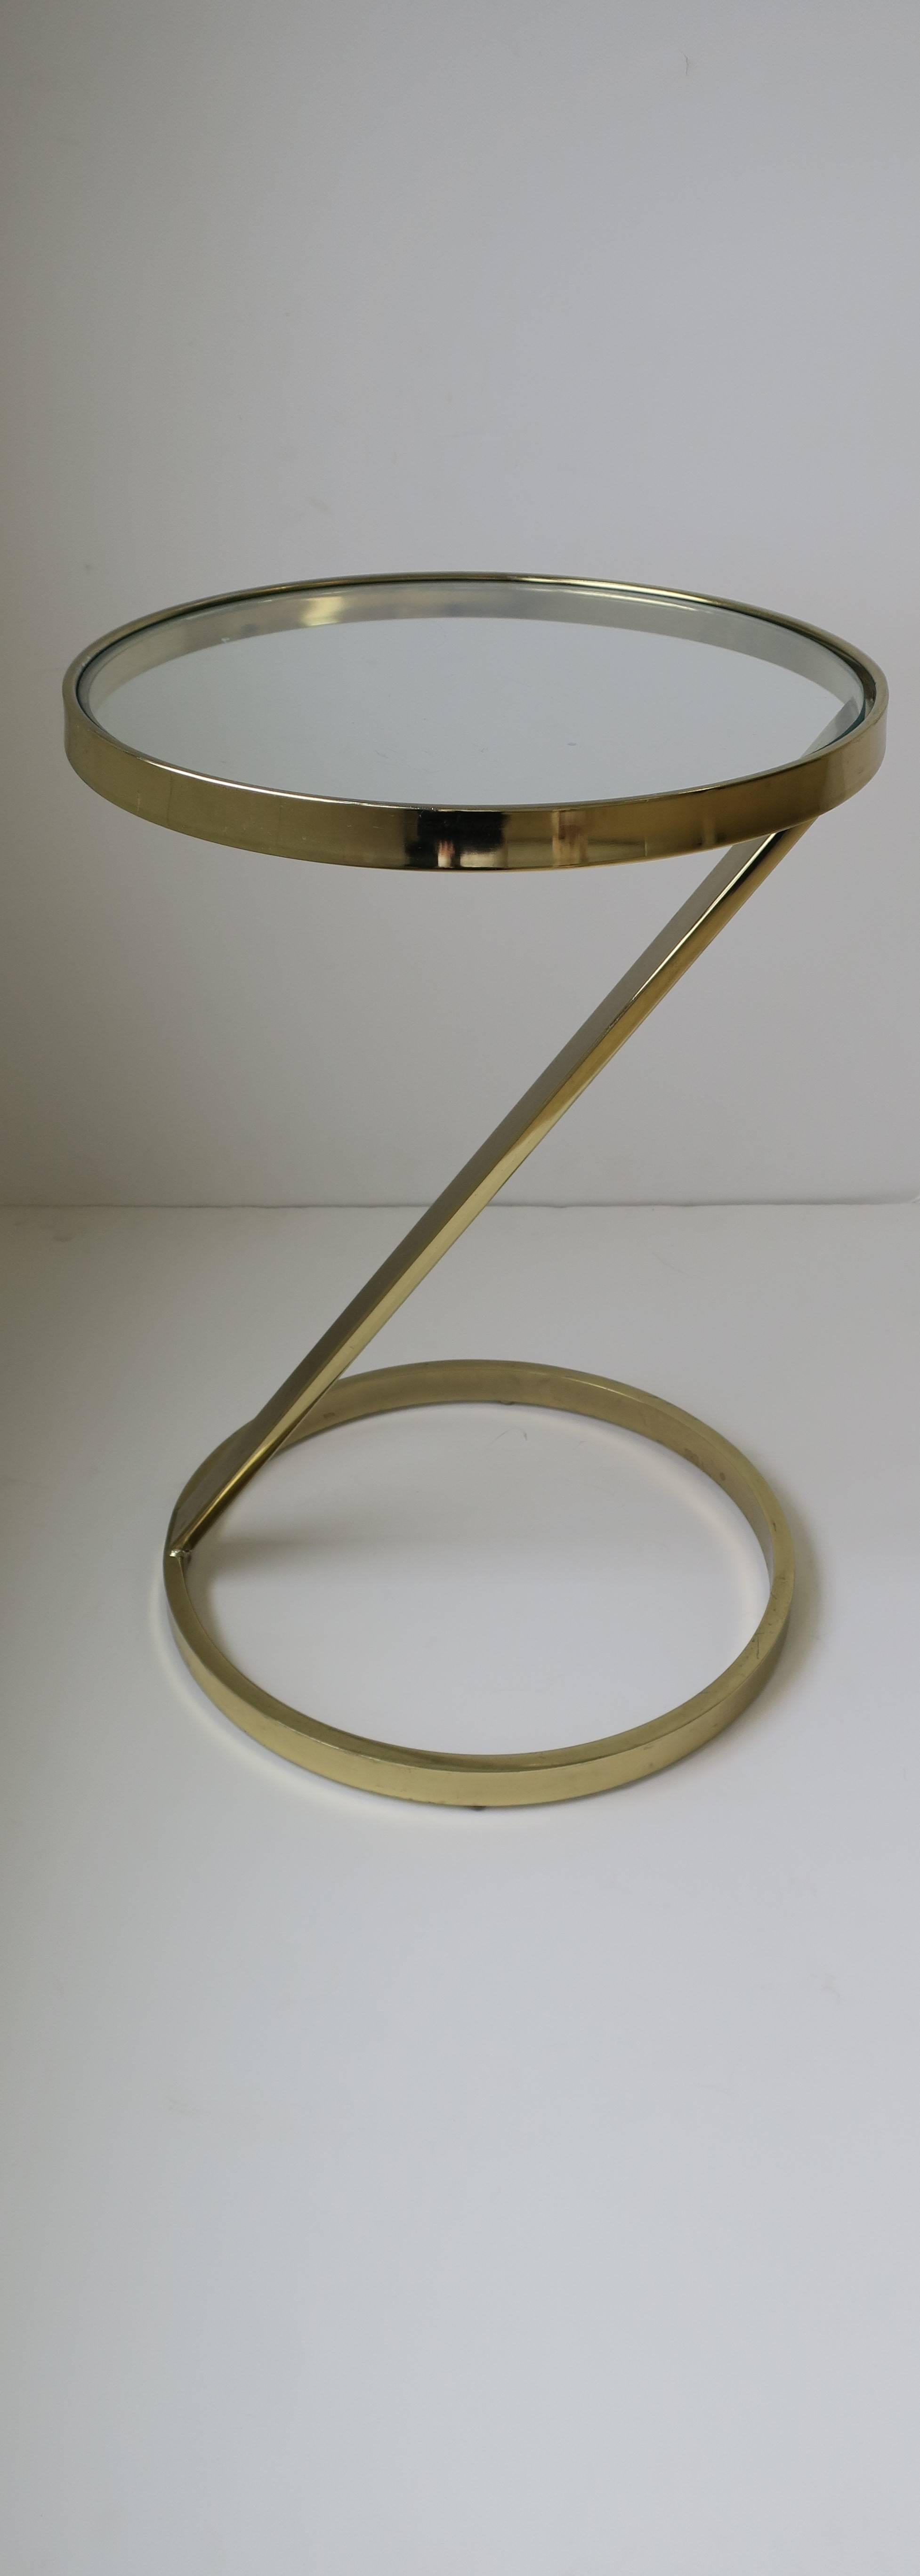 A Modern style round brass plated and glass side or drinks table in the style of designer Milo Baughman, circa Late 20th century. 

Table measures: 14.5